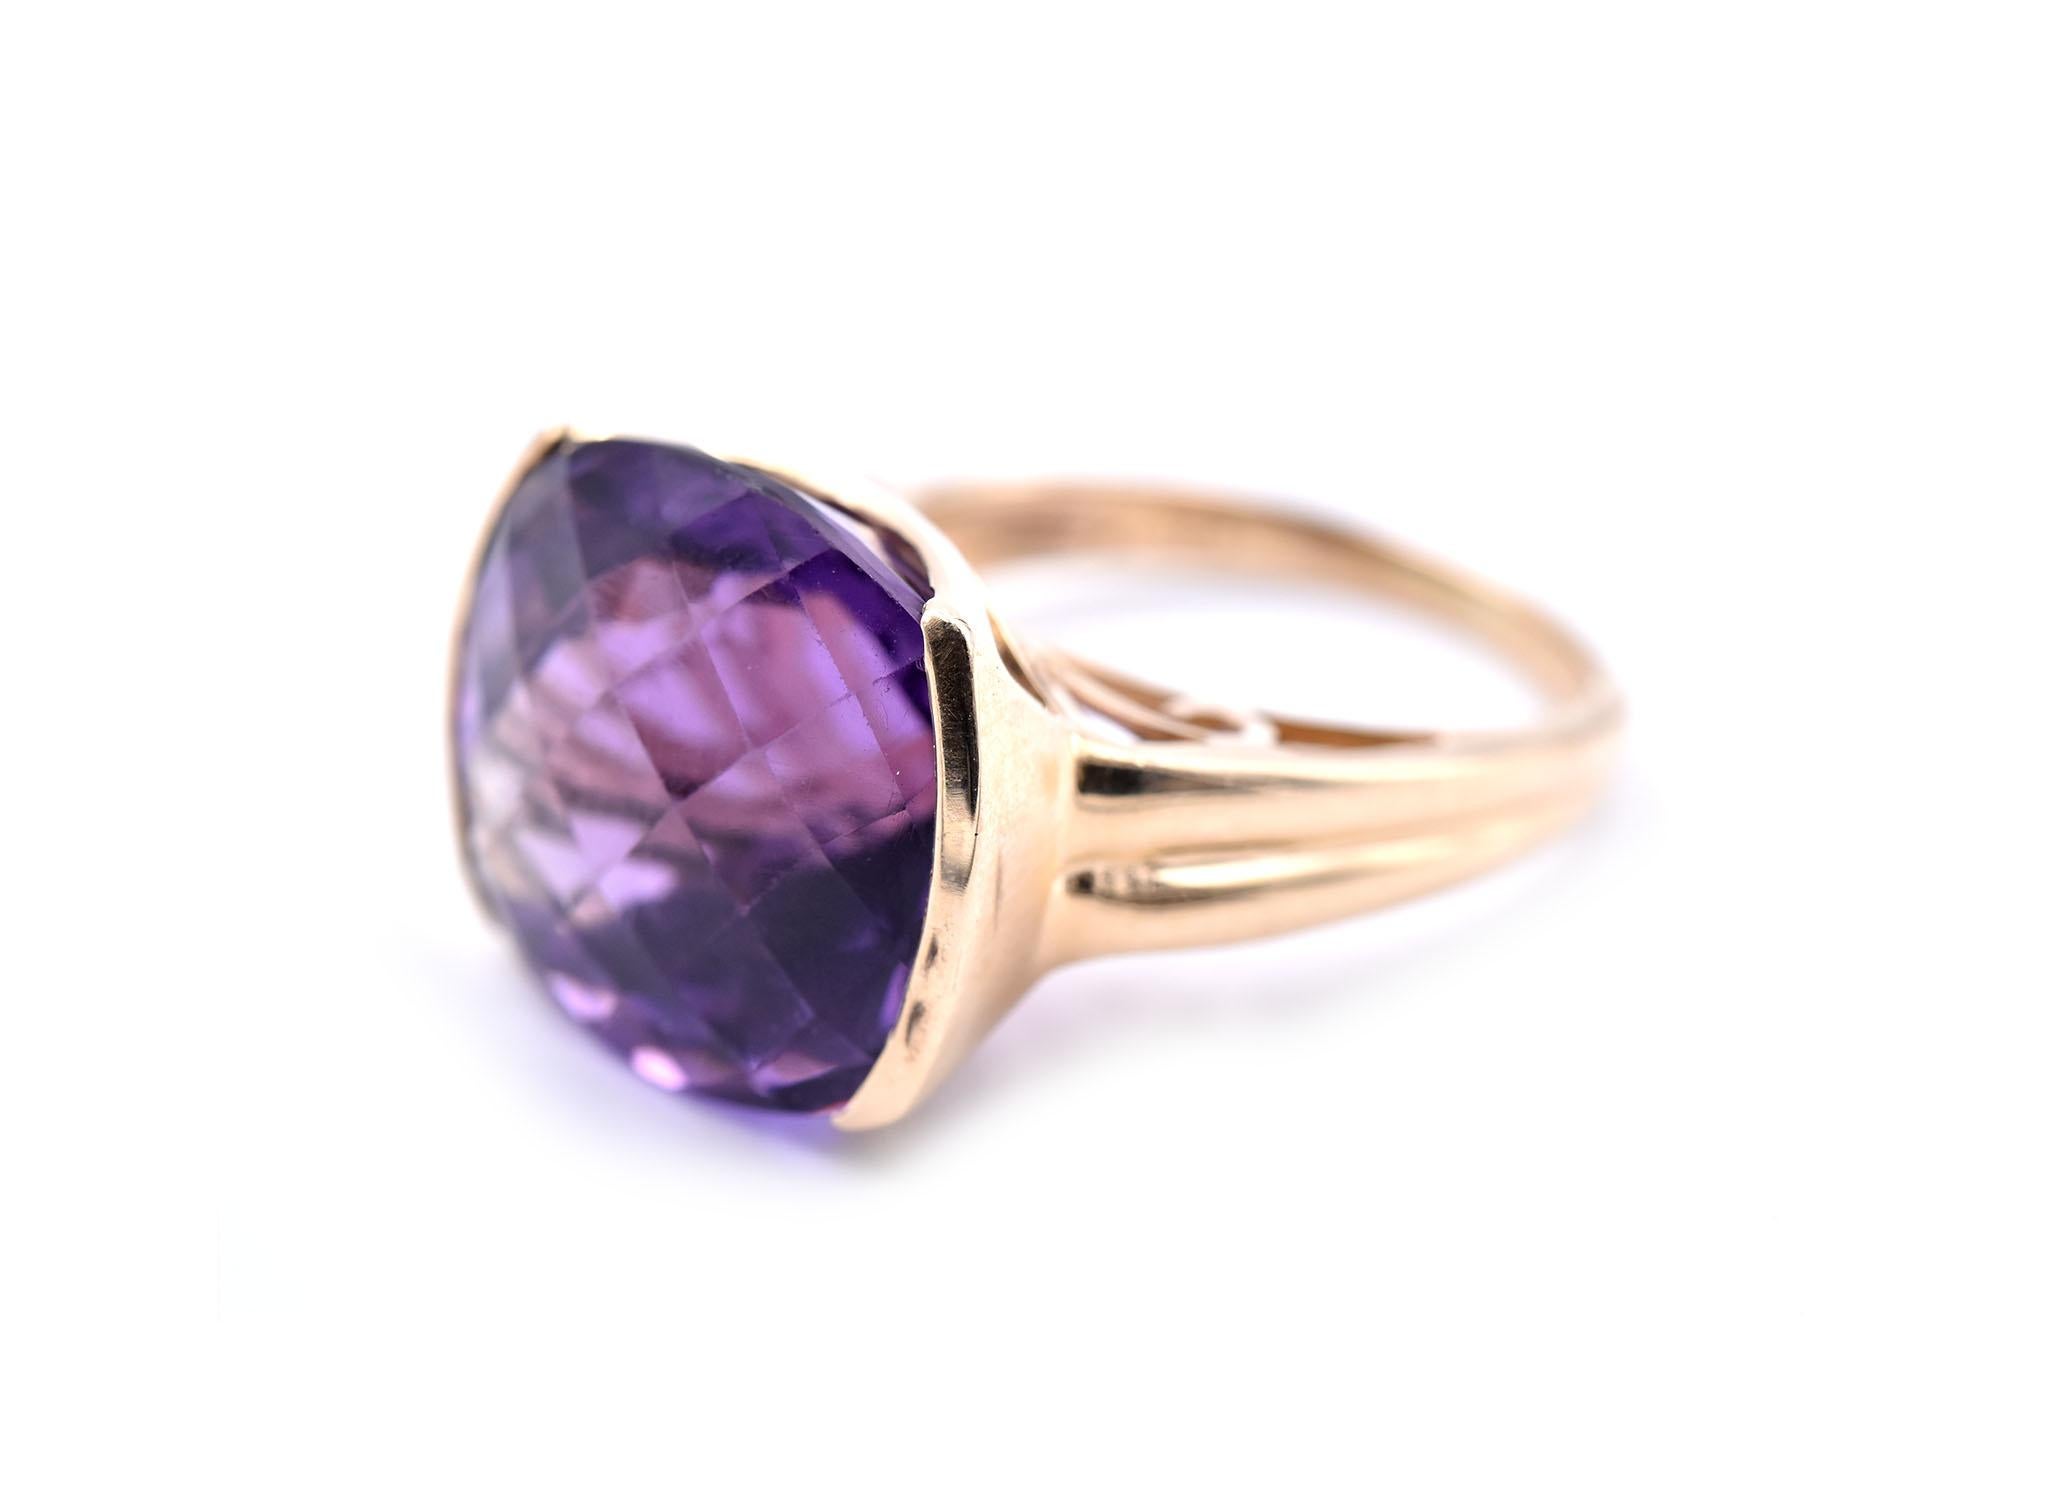 Designer: custom
Material: 14k yellow gold
Amethyst: 1 cushion cut=14.37ct
Ring size: 8 (please allow two additional shipping days for sizing requests)
Dimensions: ring top is 15.28mm by 17.78mm
Weight: 8.21 grams
